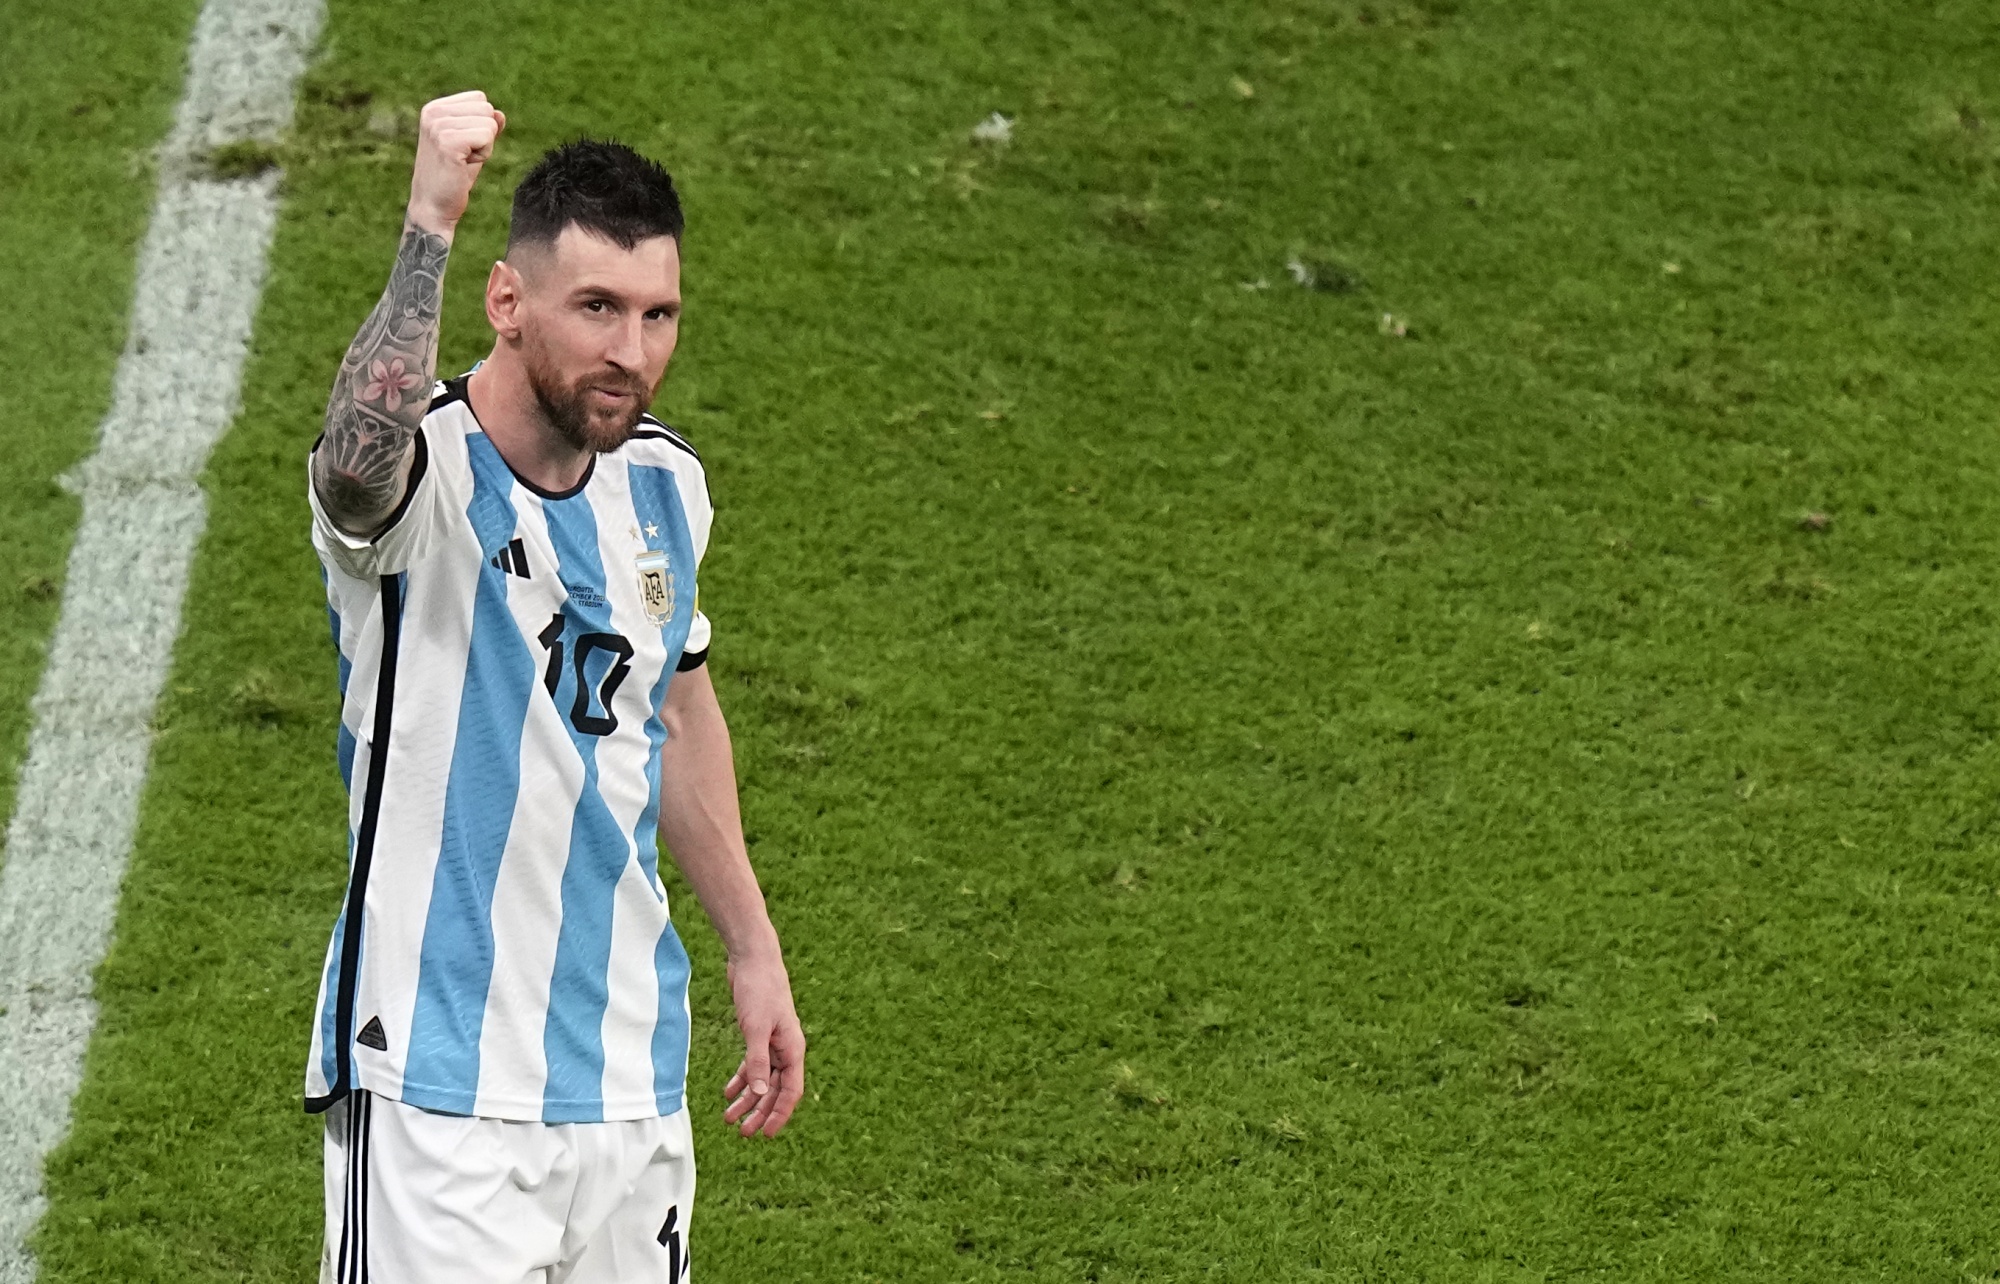 Lionel Messi guides Argentina to World Cup final